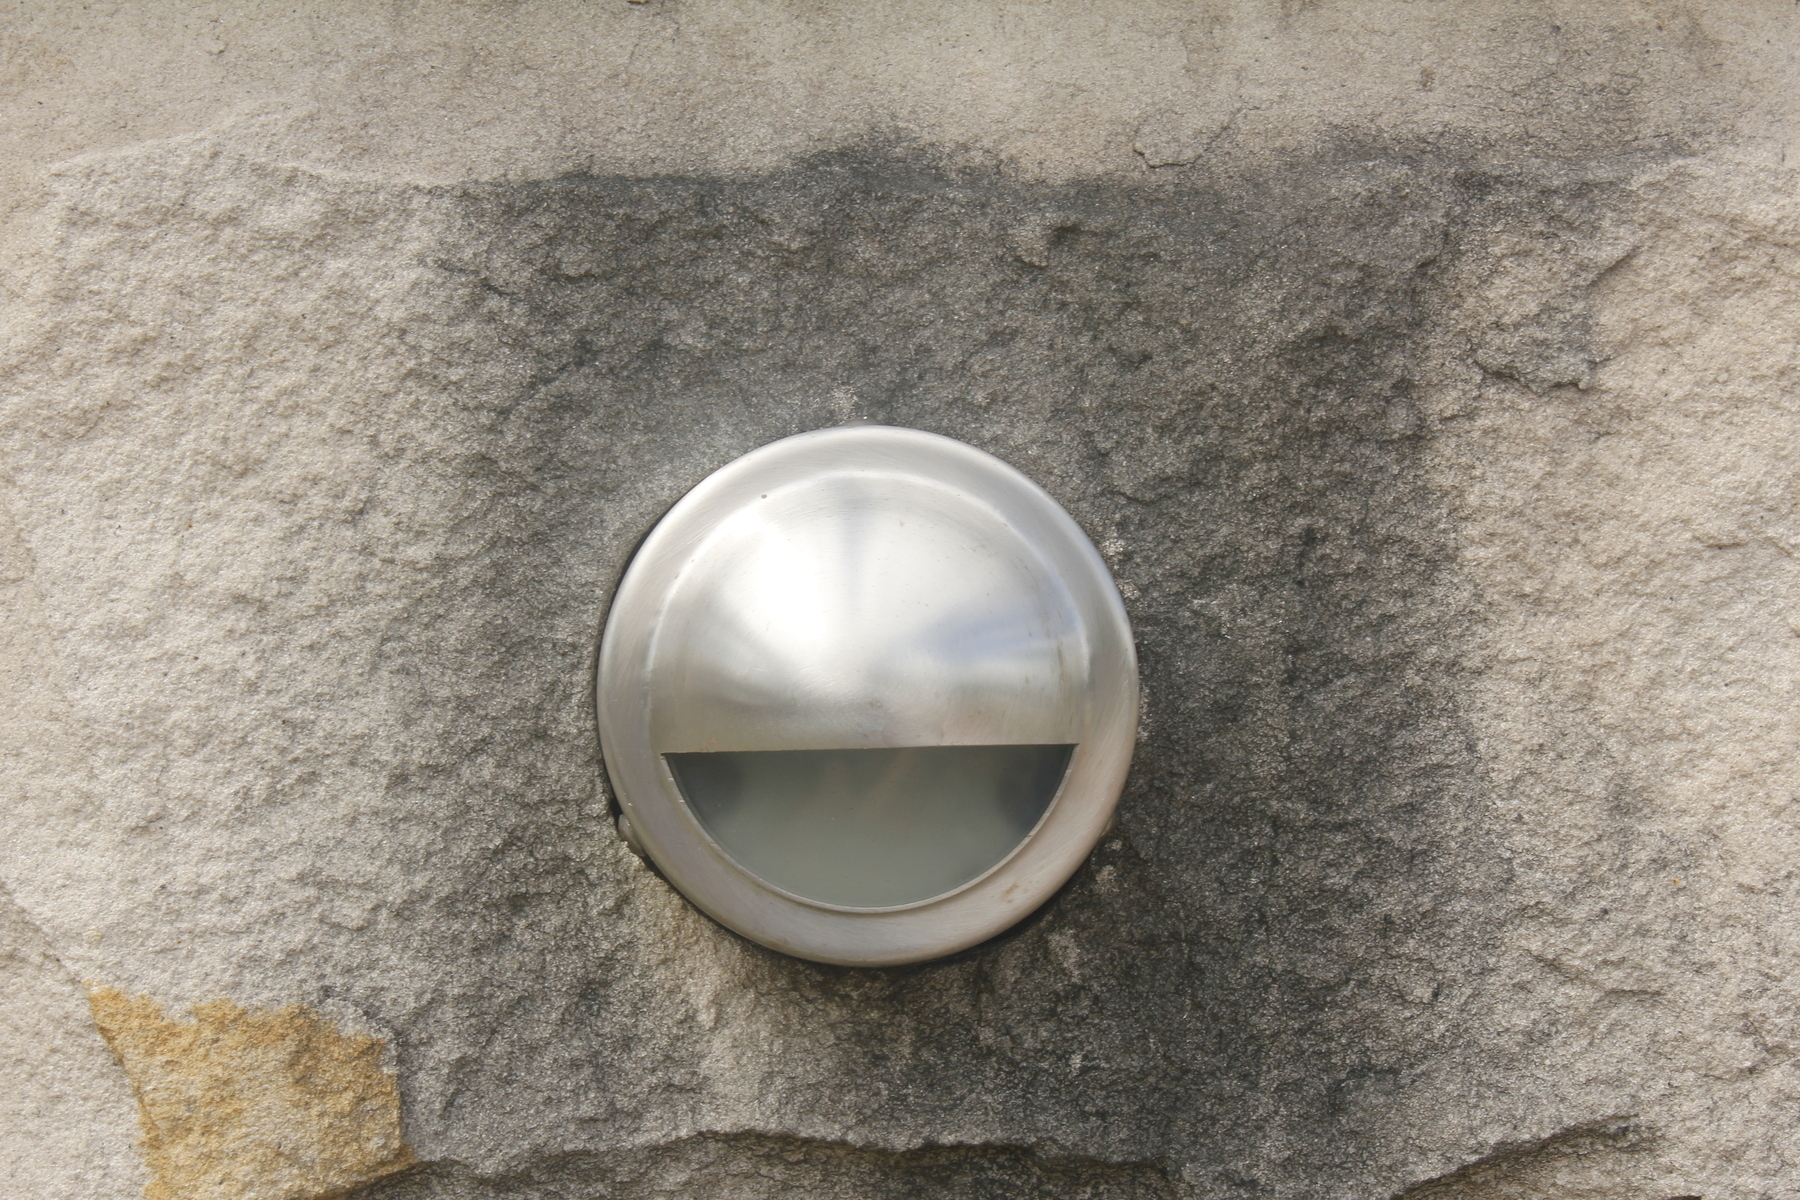 A shiny silver light fitting set into a stained sandstone block. The fitting is circular, with the top part curving outwards, and the bottom section cut out so that it resembles a mouth stretched wide in a big, happy grin.